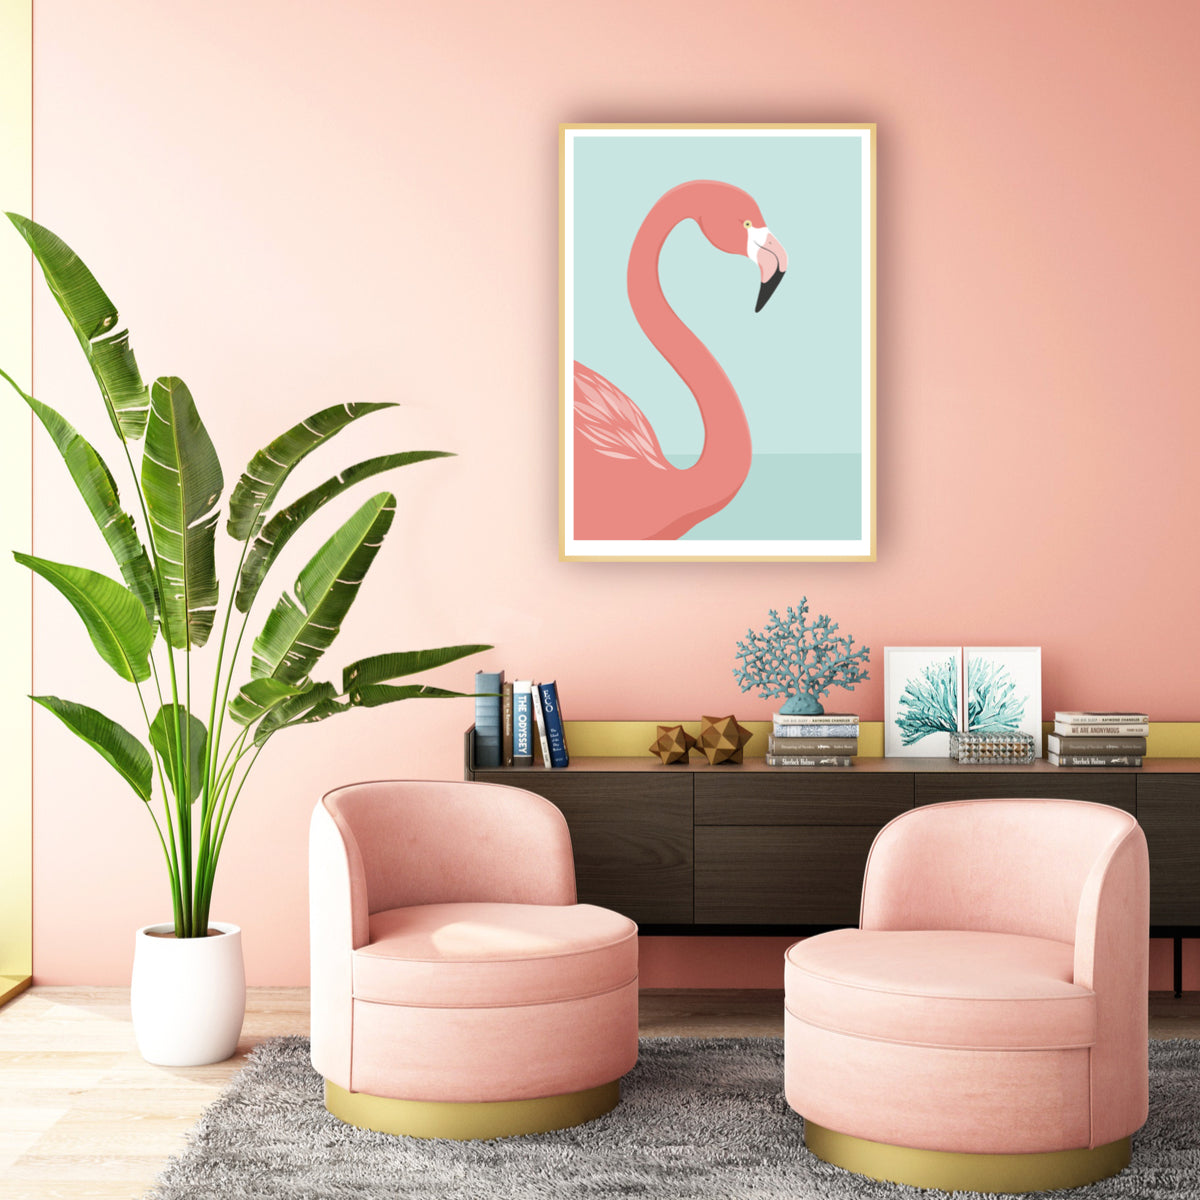 Framed art print of the Flamingo by Hansby Design, New Zealand artist 